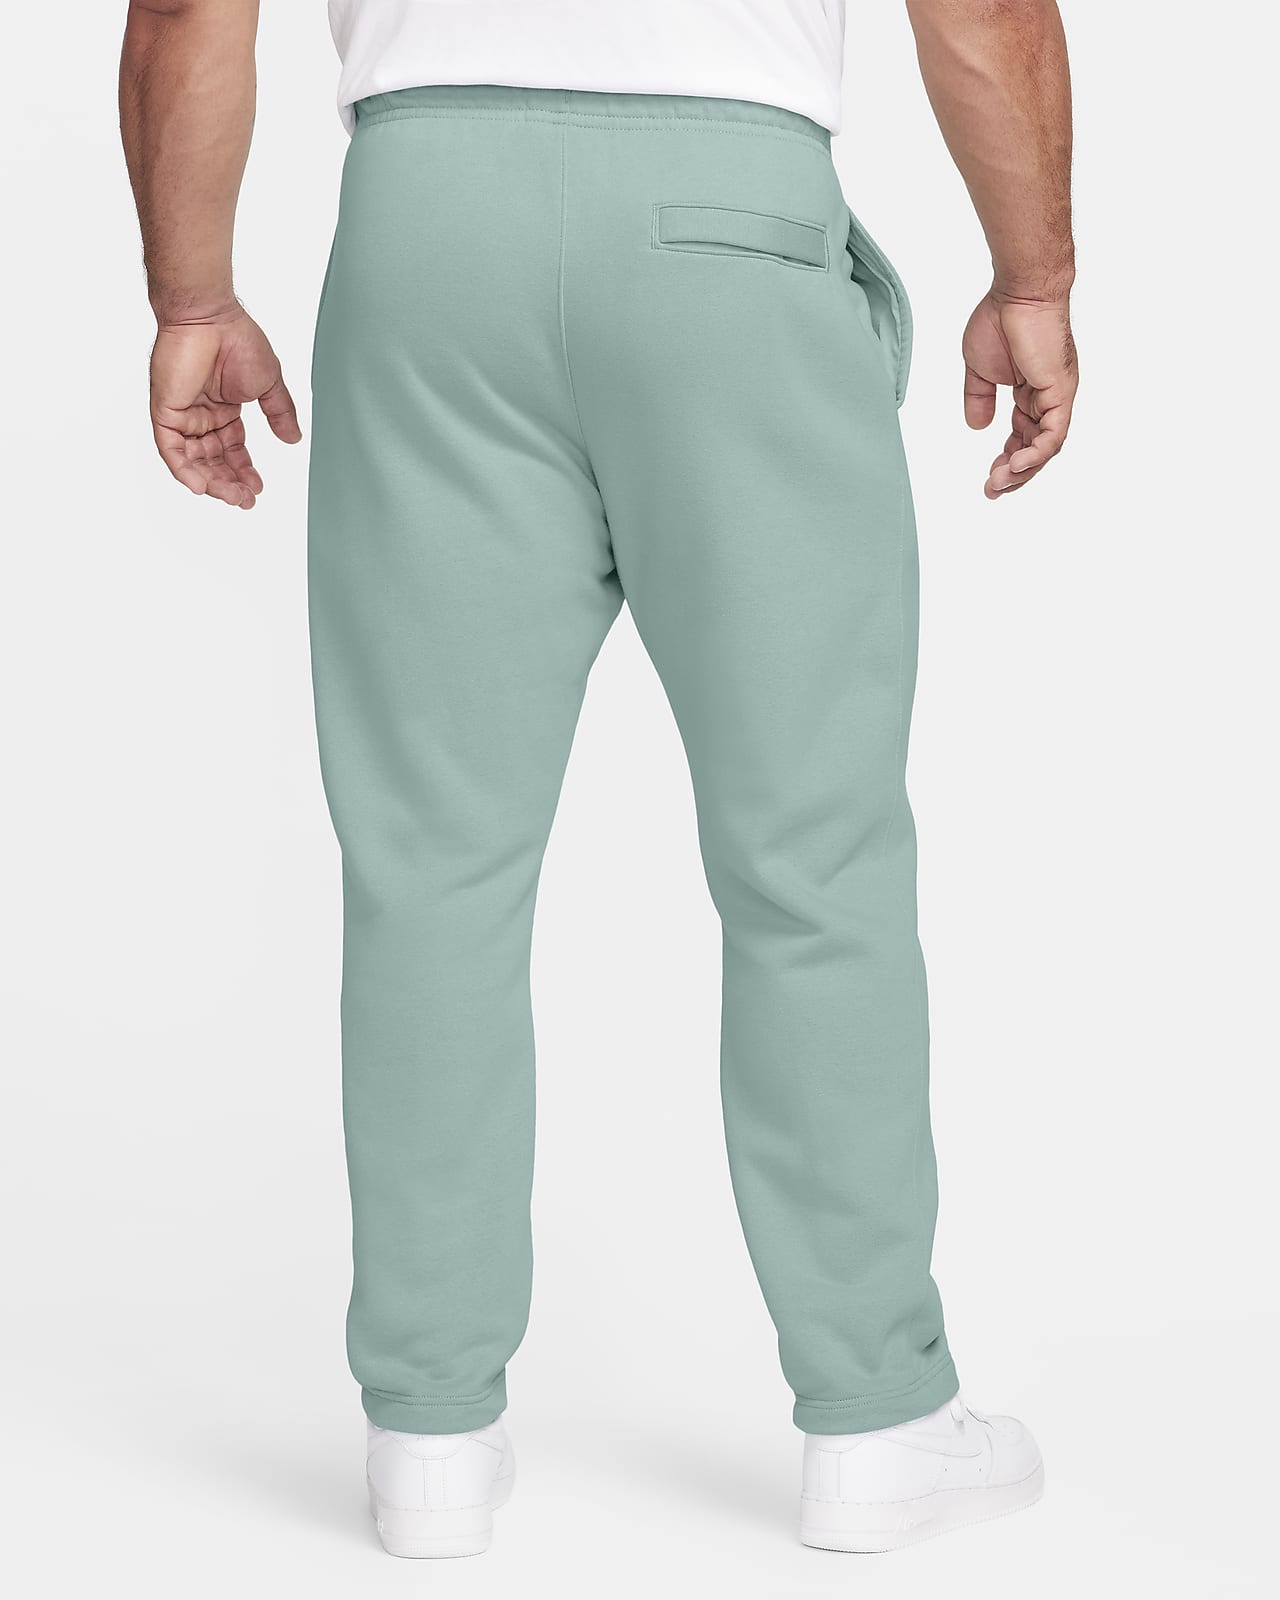 NSW CLB PANT FLC - BV2707 – The Sports Center